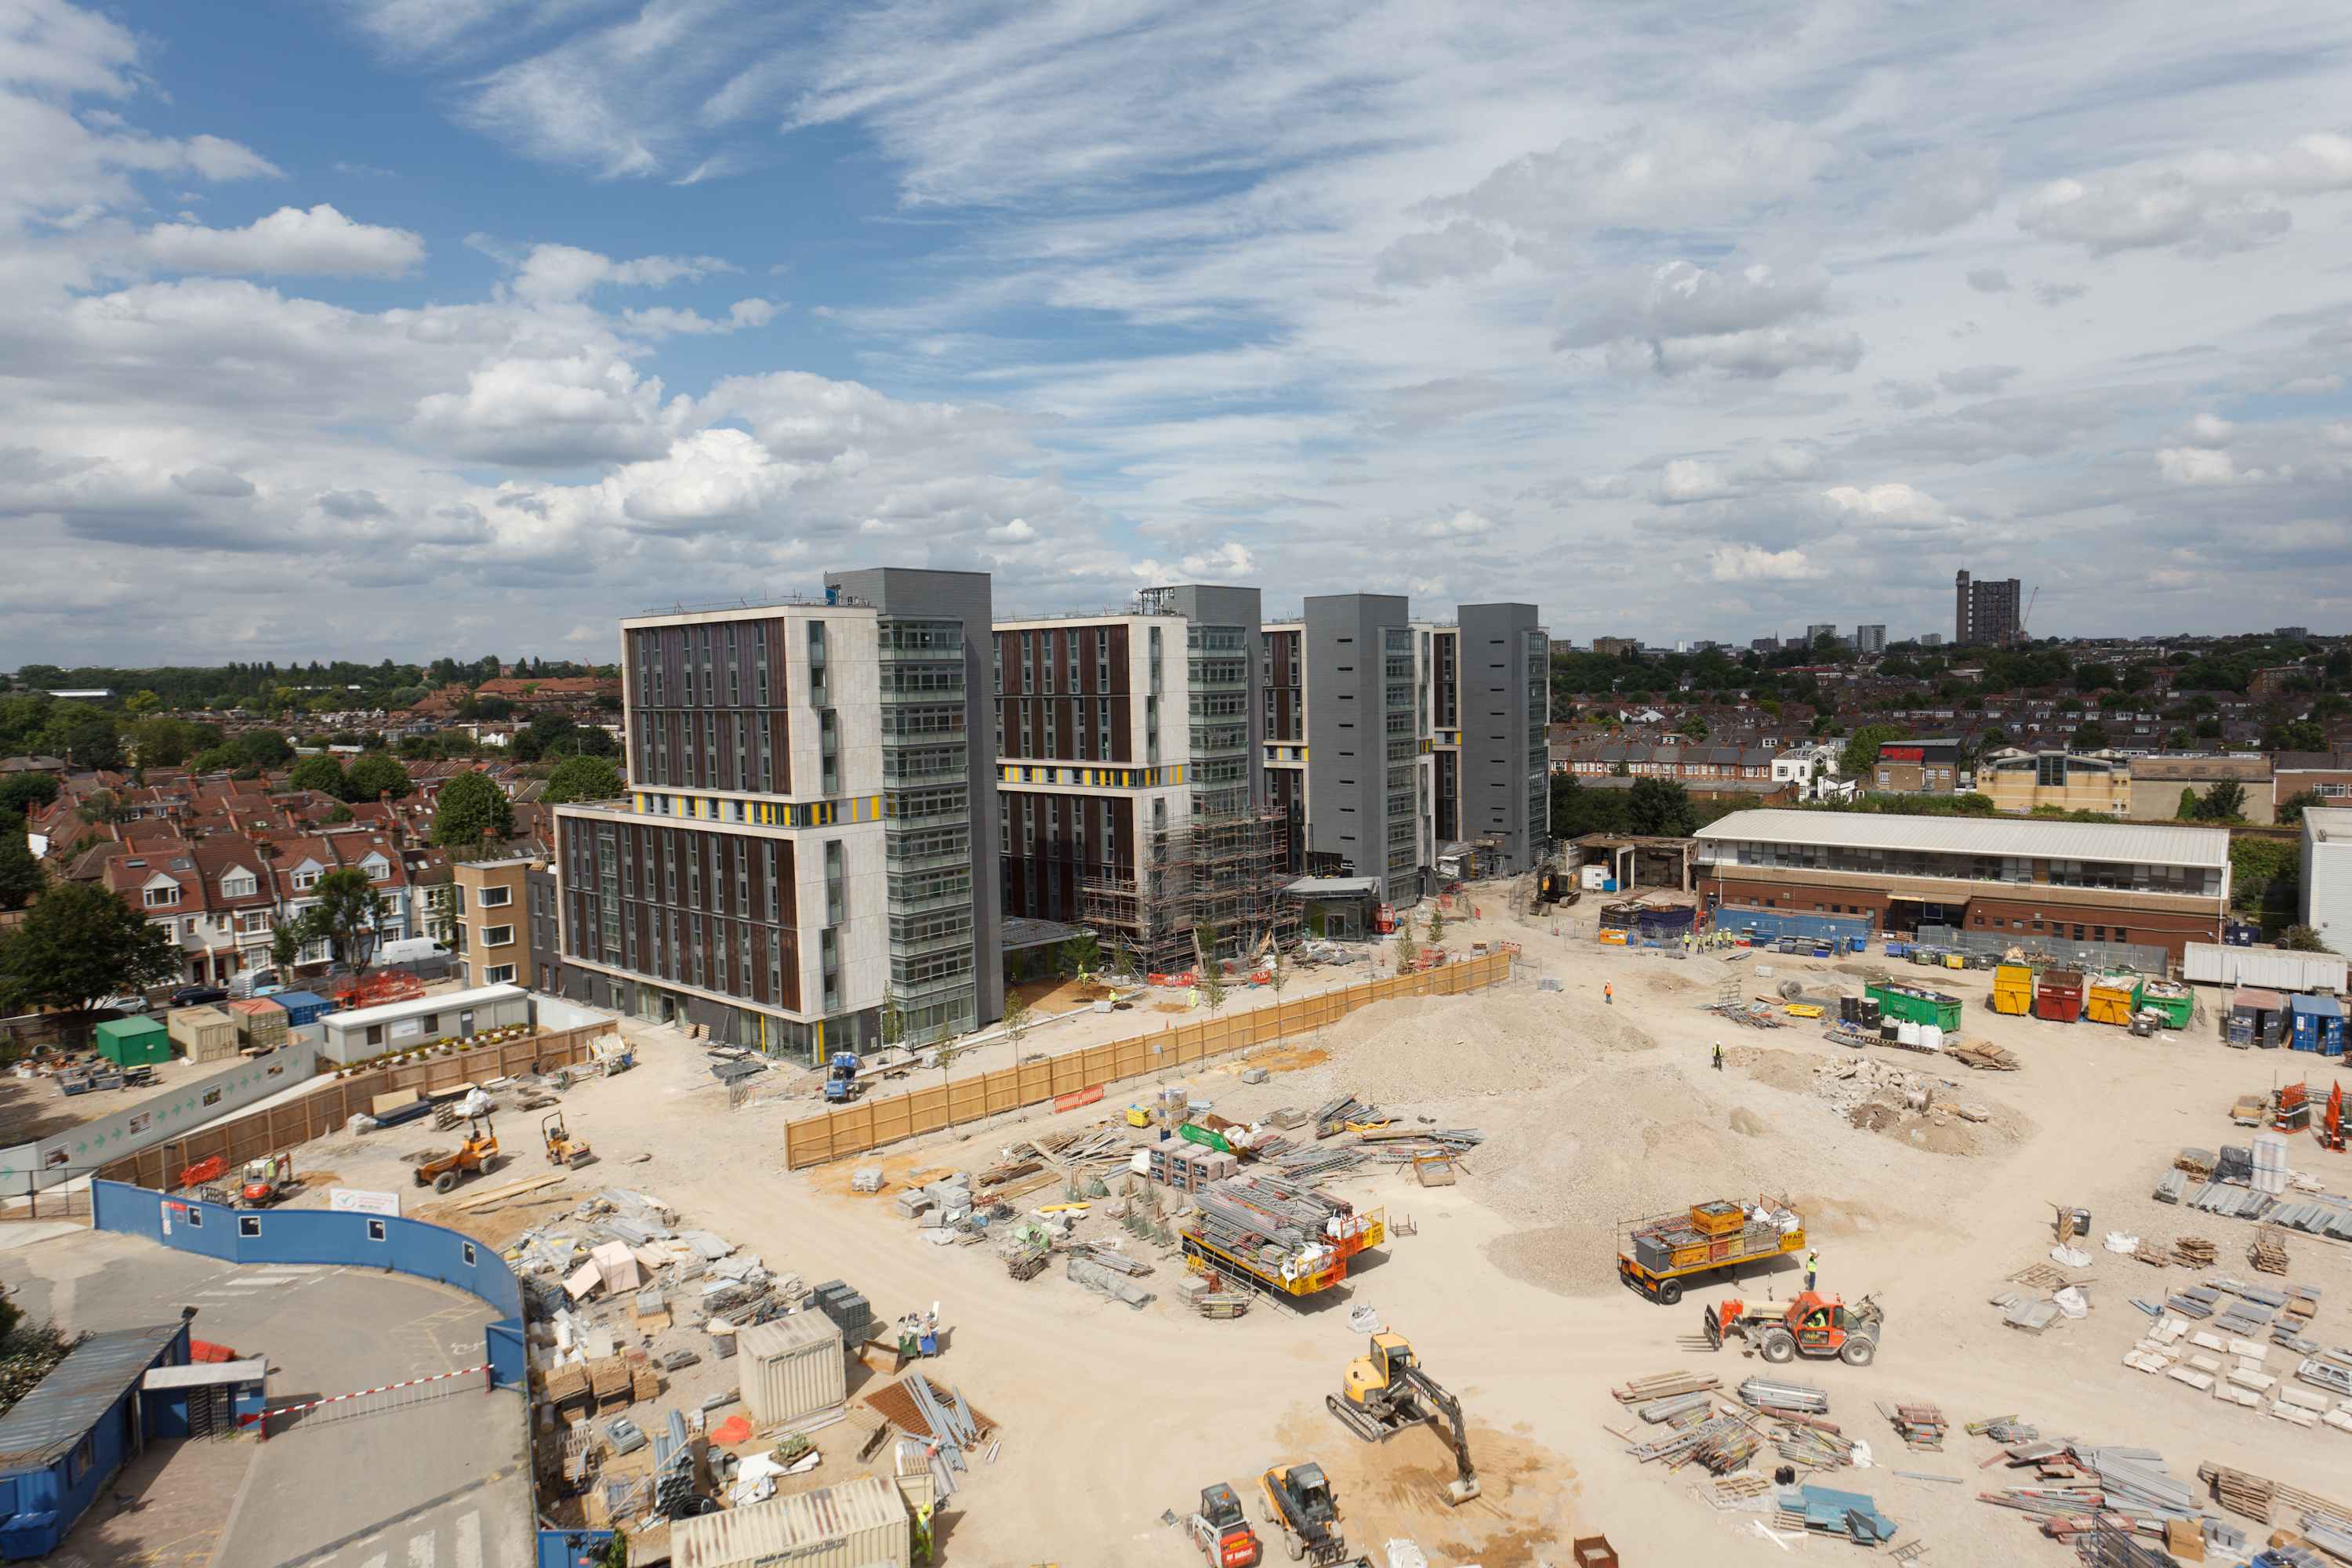 A finished phase of new Imperial College buildings on a still active construction site.